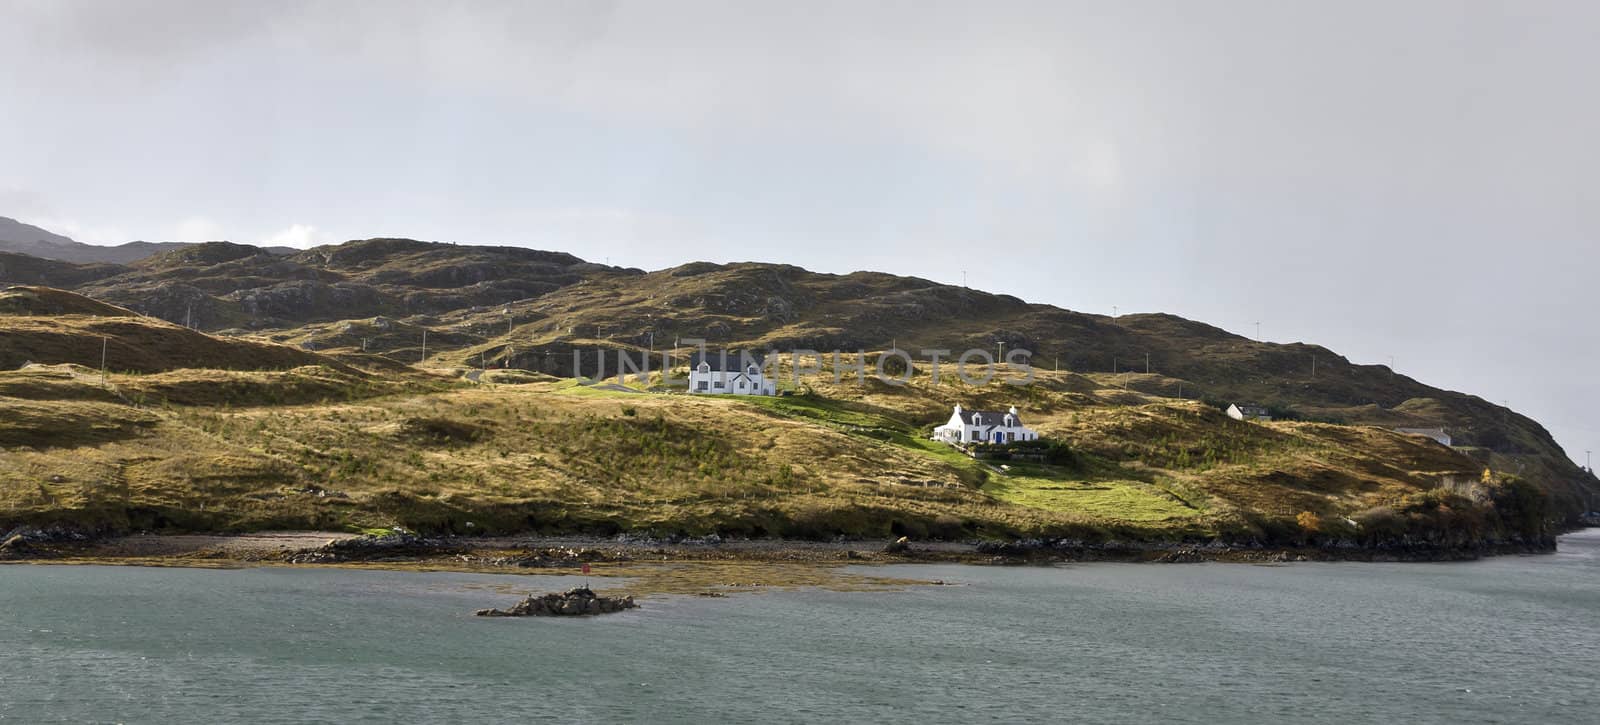 two remote houses at coastline in scotland.